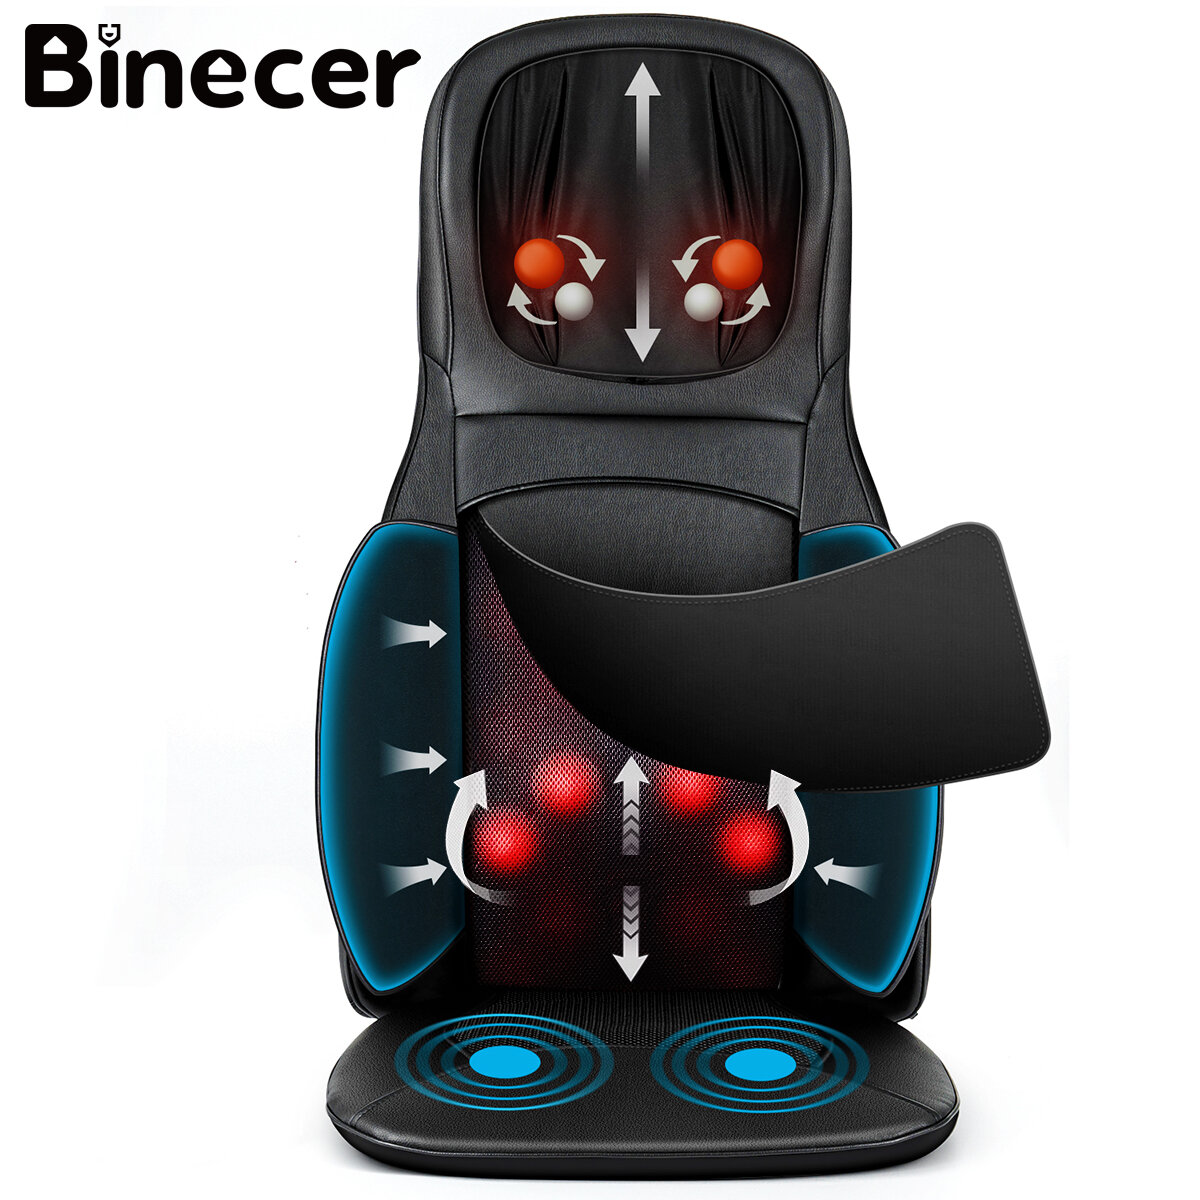 best price,binecer,mp1.2,neck,back,massager,with,heat,eu,discount